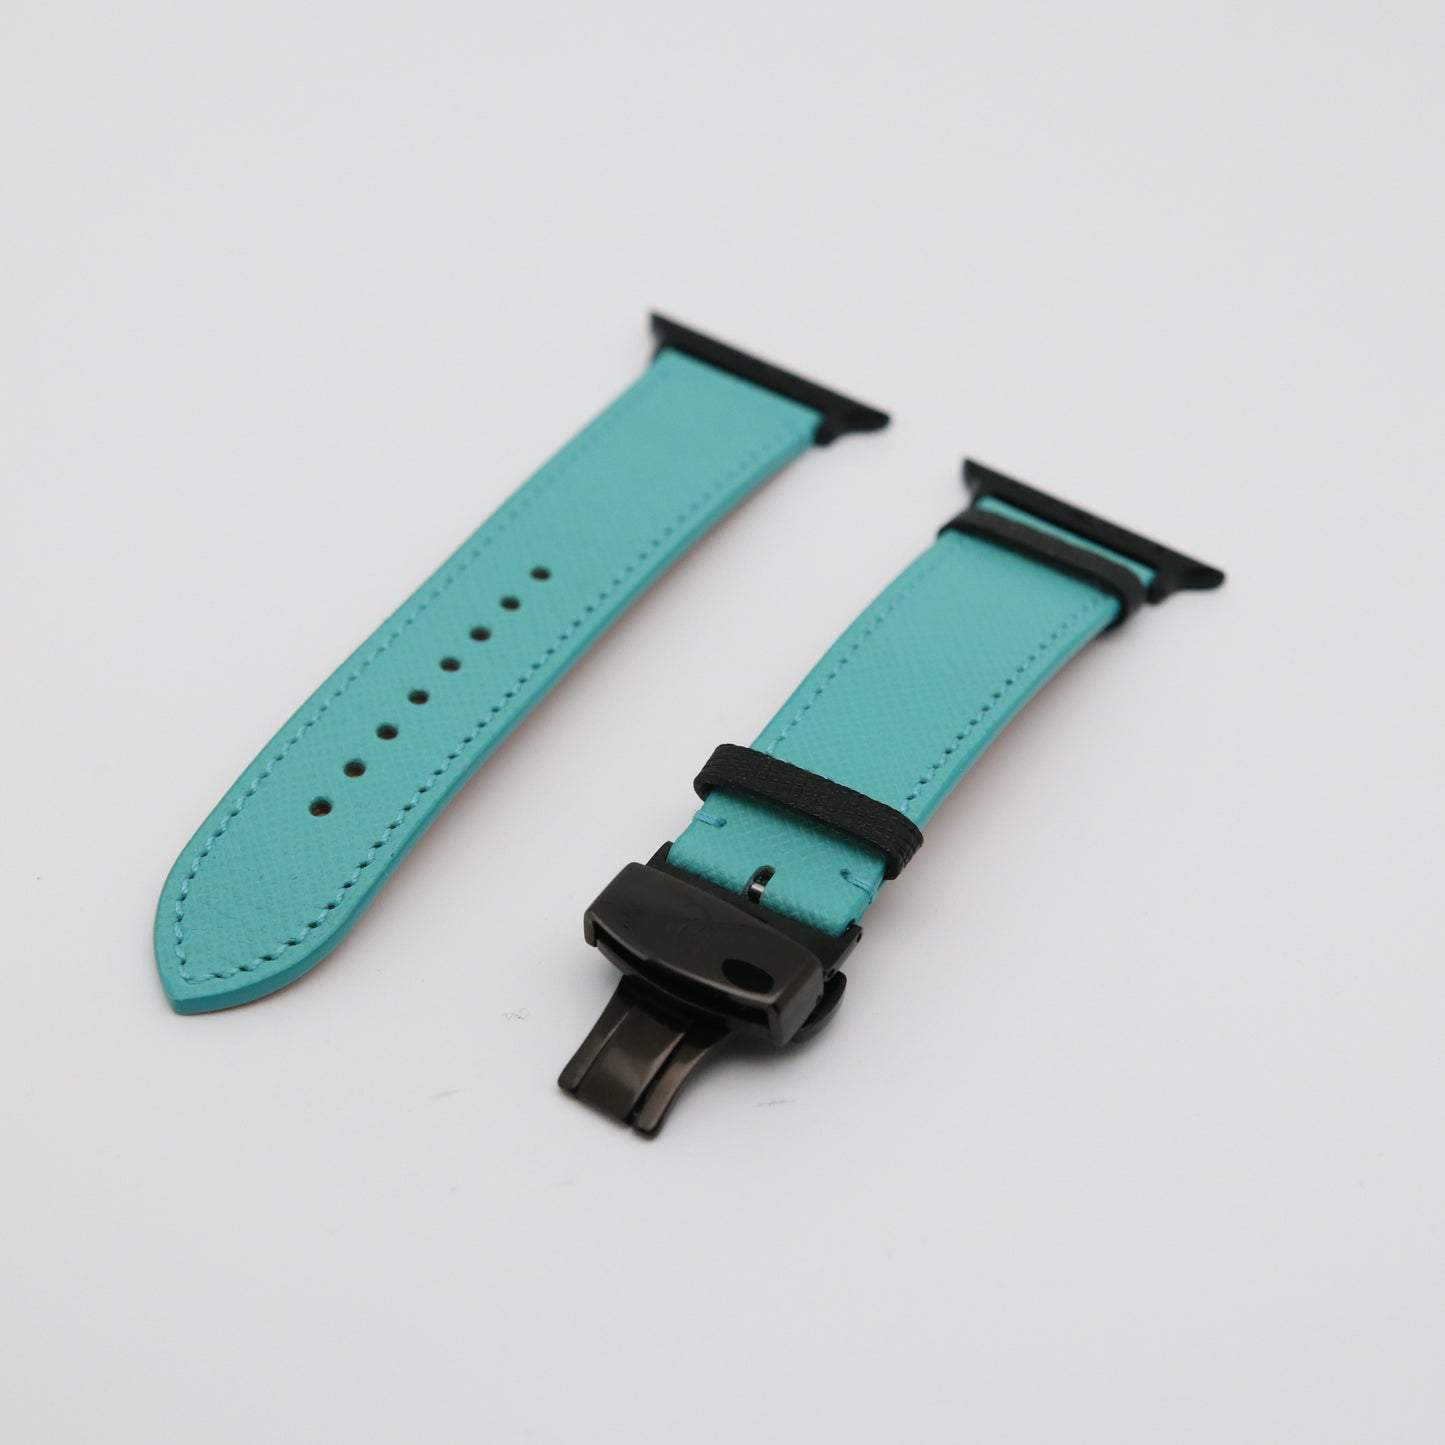 Apple watch band - Saffiano leather - Elegance Series